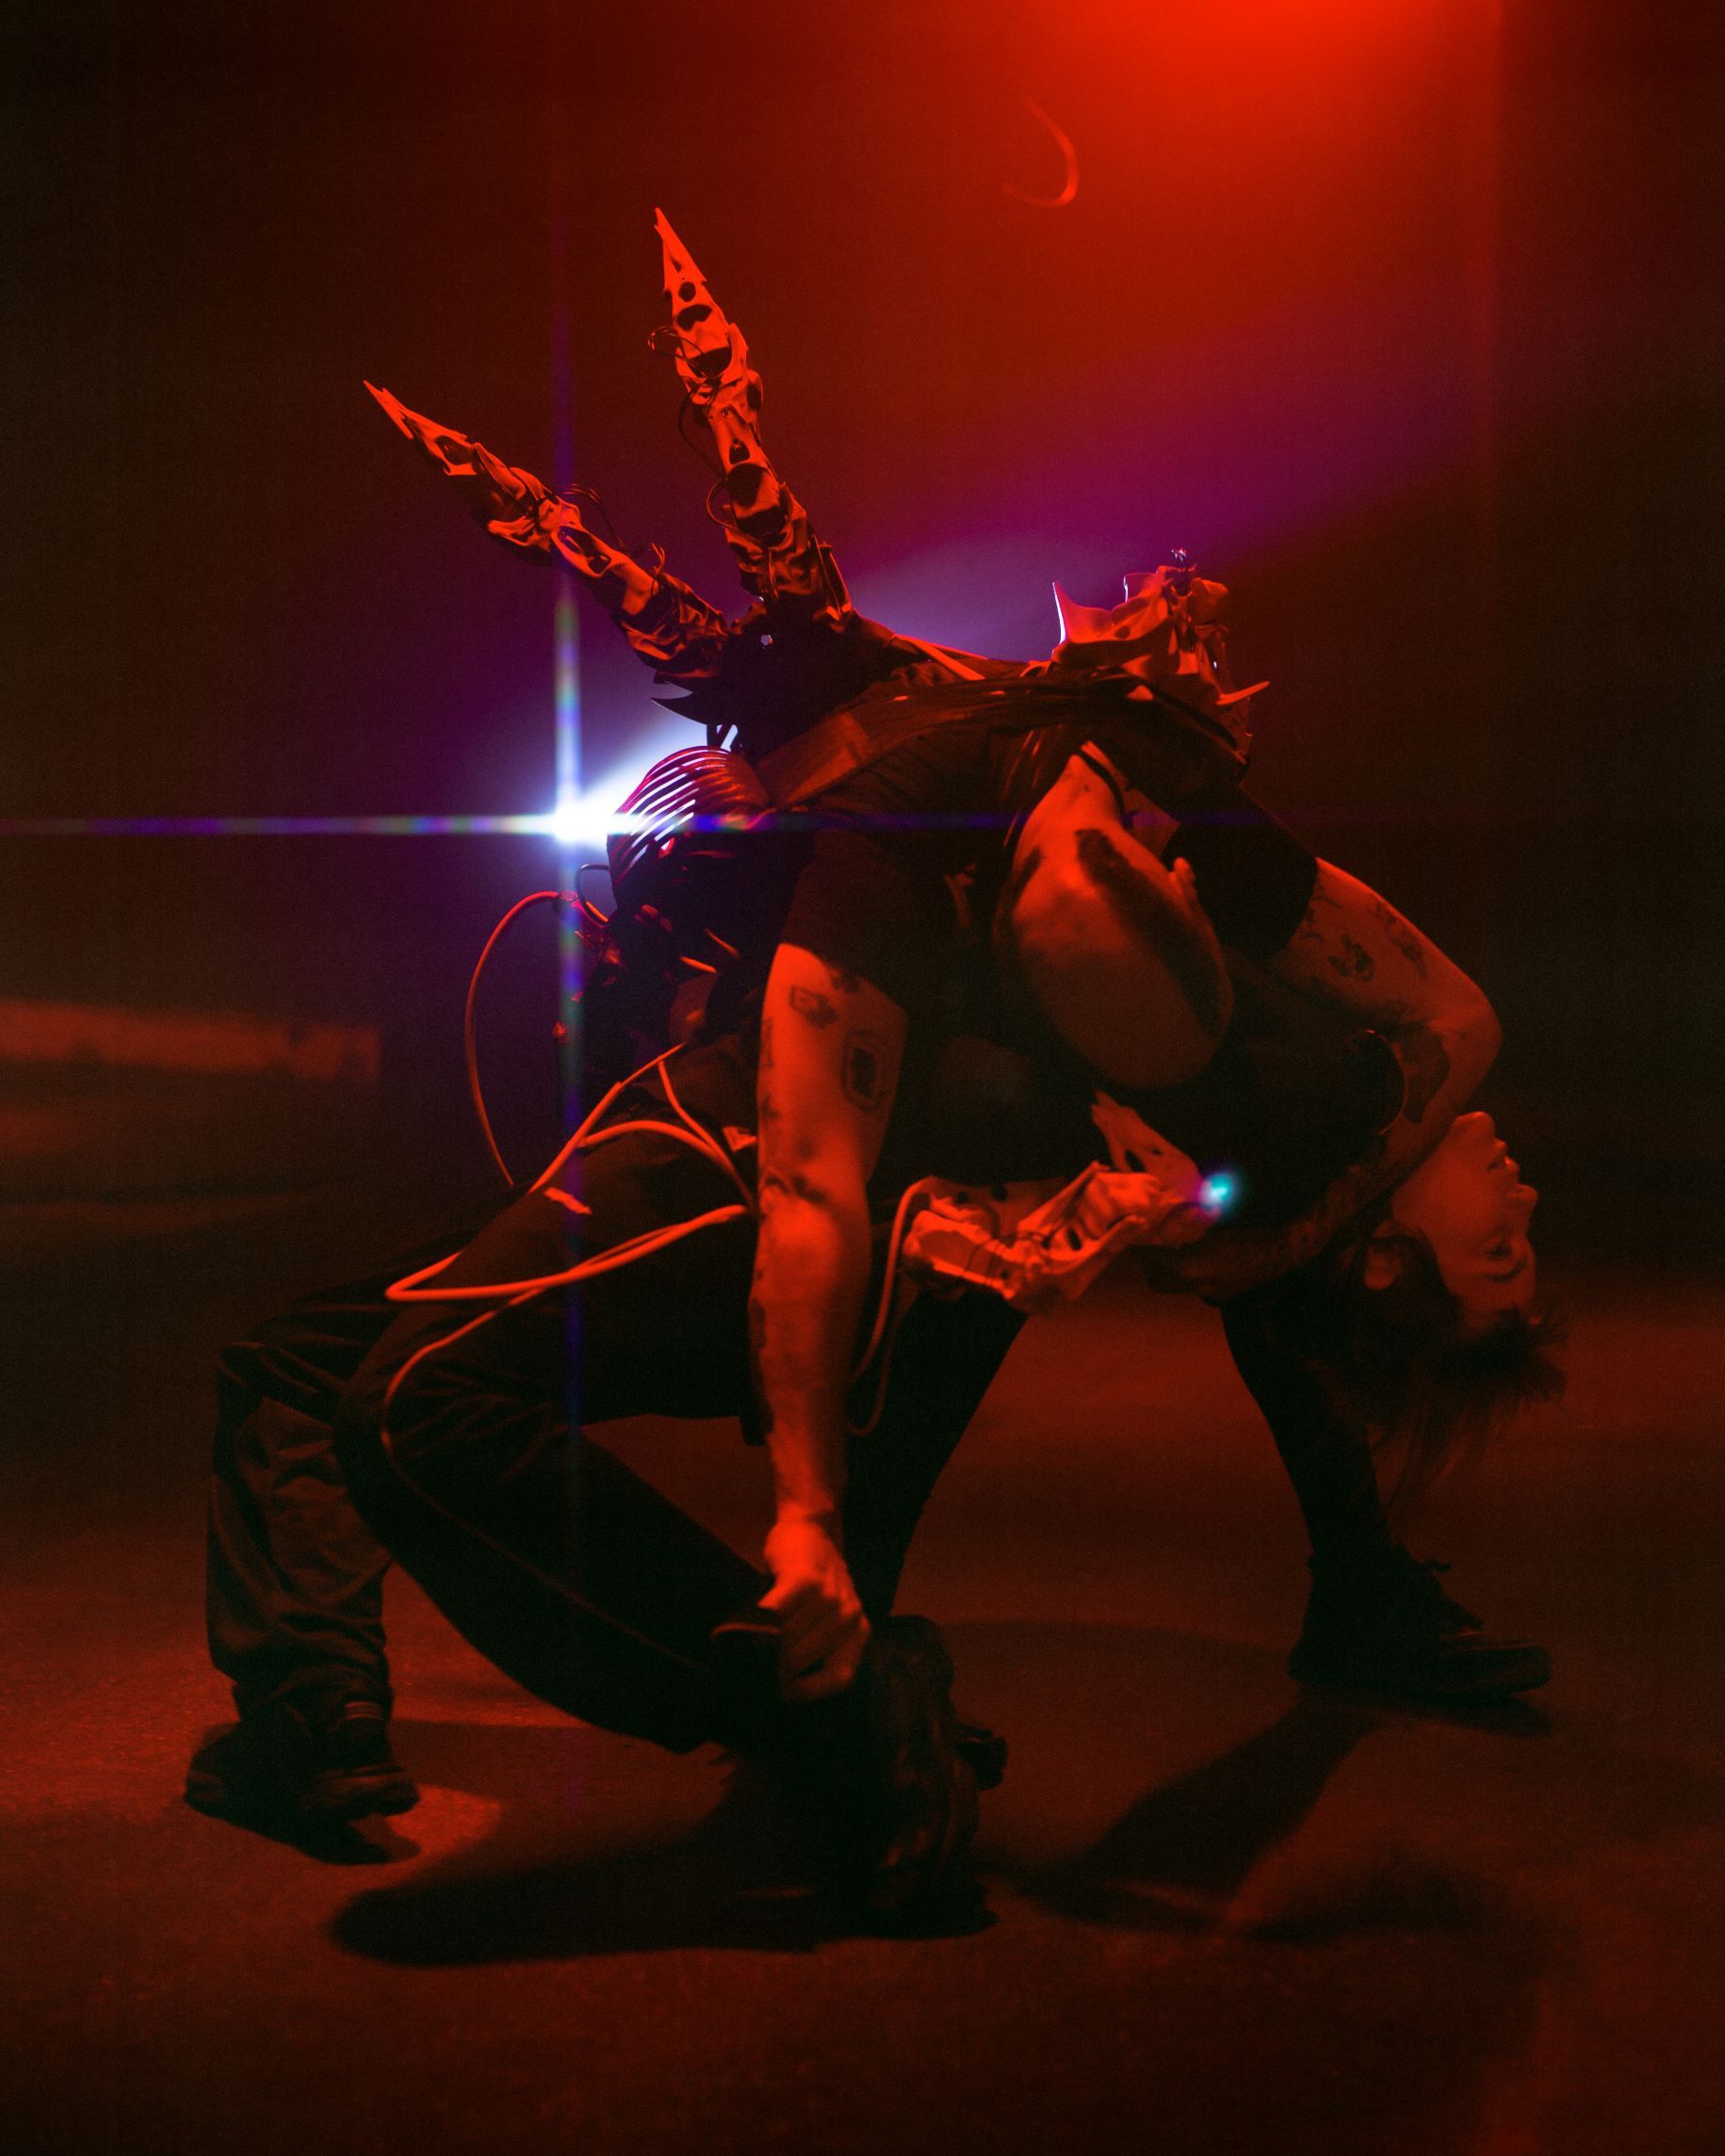 A person with Iro-haircut, kneeling on the floor. Their upper body faces the floor. They were cloth with big "goads". The scene is in red light.